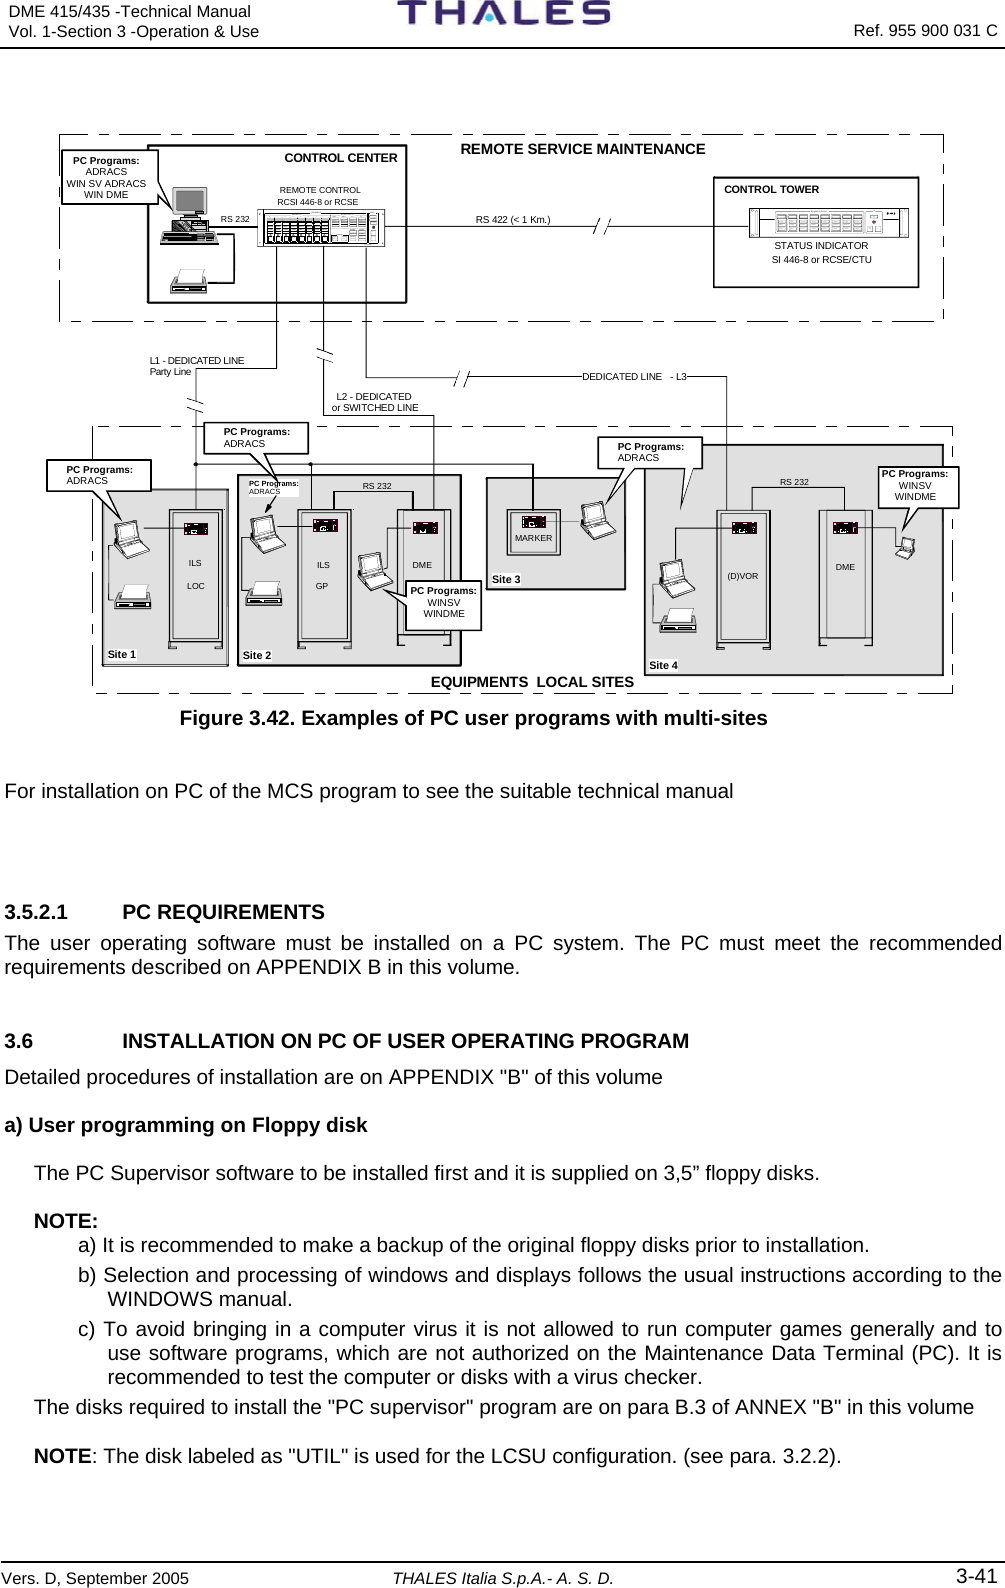 DME 415/435 -Technical Manual Vol. 1-Section 3 -Operation &amp; Use   Ref. 955 900 031 C Vers. D, September 2005 THALES Italia S.p.A.- A. S. D. 3-41  STATUS INDICATOR SI 446-8 or RCSE/CTU RS 422 (&lt; 1 Km.)REMOTE CONTROL RCSI 446-8 or RCSE2AL AR MNORMALWARNINGTESTLAM P SI LON1ALAR MNORMALWARNING4AL AR MNORMALWARNING3ALAR MNORMALWARNING6AL AR MNORMALWARNING5ALAR MNORMALWARNING8ALAR MNORMALWARNING7AL AR MNORMALWARNINGEQUI PME NT STA TU S SIL2 - DEDICATED RS 232DME (D)VORDME GPILSLOCILSMARKERRS 232SELE CTWARNINGNORMALDATA COMALARMSELE CTWARNINGNORMALDATA COMALARMSELE CTWARNINGNORMALDATA COMALARMSEL E CTWARN I NGNORMALDATA COMALARMSEL E CTWARNINGNORMALDATA COMALARMSEL E CTWARN I NGNORMALDATA COMALARMSEL E CTWARNINGNORMALDATA COMALARMSEL E CTWARNINGNORMALDATA COMALARMEQUI PME NT R CS IRCSI 44612345678DE T A I LE D STATUSMAIN STATUSREQUESTRELEASEMON 1STAND BYMON 2 TX 1ON ANTFAULTYWARNINGTX 2ON ANTFAULTYWARNINGOPERATIONWARNINGDATA COMSILFAULTYBYPA SS EDFAULTYBYPA SS EDOTHER WA RNANT FT YENV  ALRMMAINS OFFENA BL E DENGAGEDSTATIONCONTROLCHANGEOVEREQU IPON/OFFCOMMANDST AN D BYRS 232 REMOTE SERVICE MAINTENANCECONTROL TOWERCONTROL CENTEREQUIPMENTS  LOCAL SITES or SWITCHED LINEDEDICATED LINE   - L3L1 - DEDICATED LINEParty Line  Site 1 Site 2Site 3Site 4PC Programs:ADRACSPC Programs:ADRACSWIN SV ADRACSWIN DMEPC Programs:ADRACSPC Programs:ADRACSPC Programs:ADRACSPC Programs:WINSVWINDMEPC Programs:WINSVWINDME Figure 3.42. Examples of PC user programs with multi-sites  For installation on PC of the MCS program to see the suitable technical manual   3.5.2.1 PC REQUIREMENTS The user operating software must be installed on a PC system. The PC must meet the recommended requirements described on APPENDIX B in this volume. 3.6  INSTALLATION ON PC OF USER OPERATING PROGRAM Detailed procedures of installation are on APPENDIX &quot;B&quot; of this volume  a) User programming on Floppy disk  The PC Supervisor software to be installed first and it is supplied on 3,5” floppy disks.  NOTE:  a) It is recommended to make a backup of the original floppy disks prior to installation. b) Selection and processing of windows and displays follows the usual instructions according to the WINDOWS manual. c) To avoid bringing in a computer virus it is not allowed to run computer games generally and to use software programs, which are not authorized on the Maintenance Data Terminal (PC). It is recommended to test the computer or disks with a virus checker. The disks required to install the &quot;PC supervisor&quot; program are on para B.3 of ANNEX &quot;B&quot; in this volume NOTE: The disk labeled as &quot;UTIL&quot; is used for the LCSU configuration. (see para. 3.2.2).   